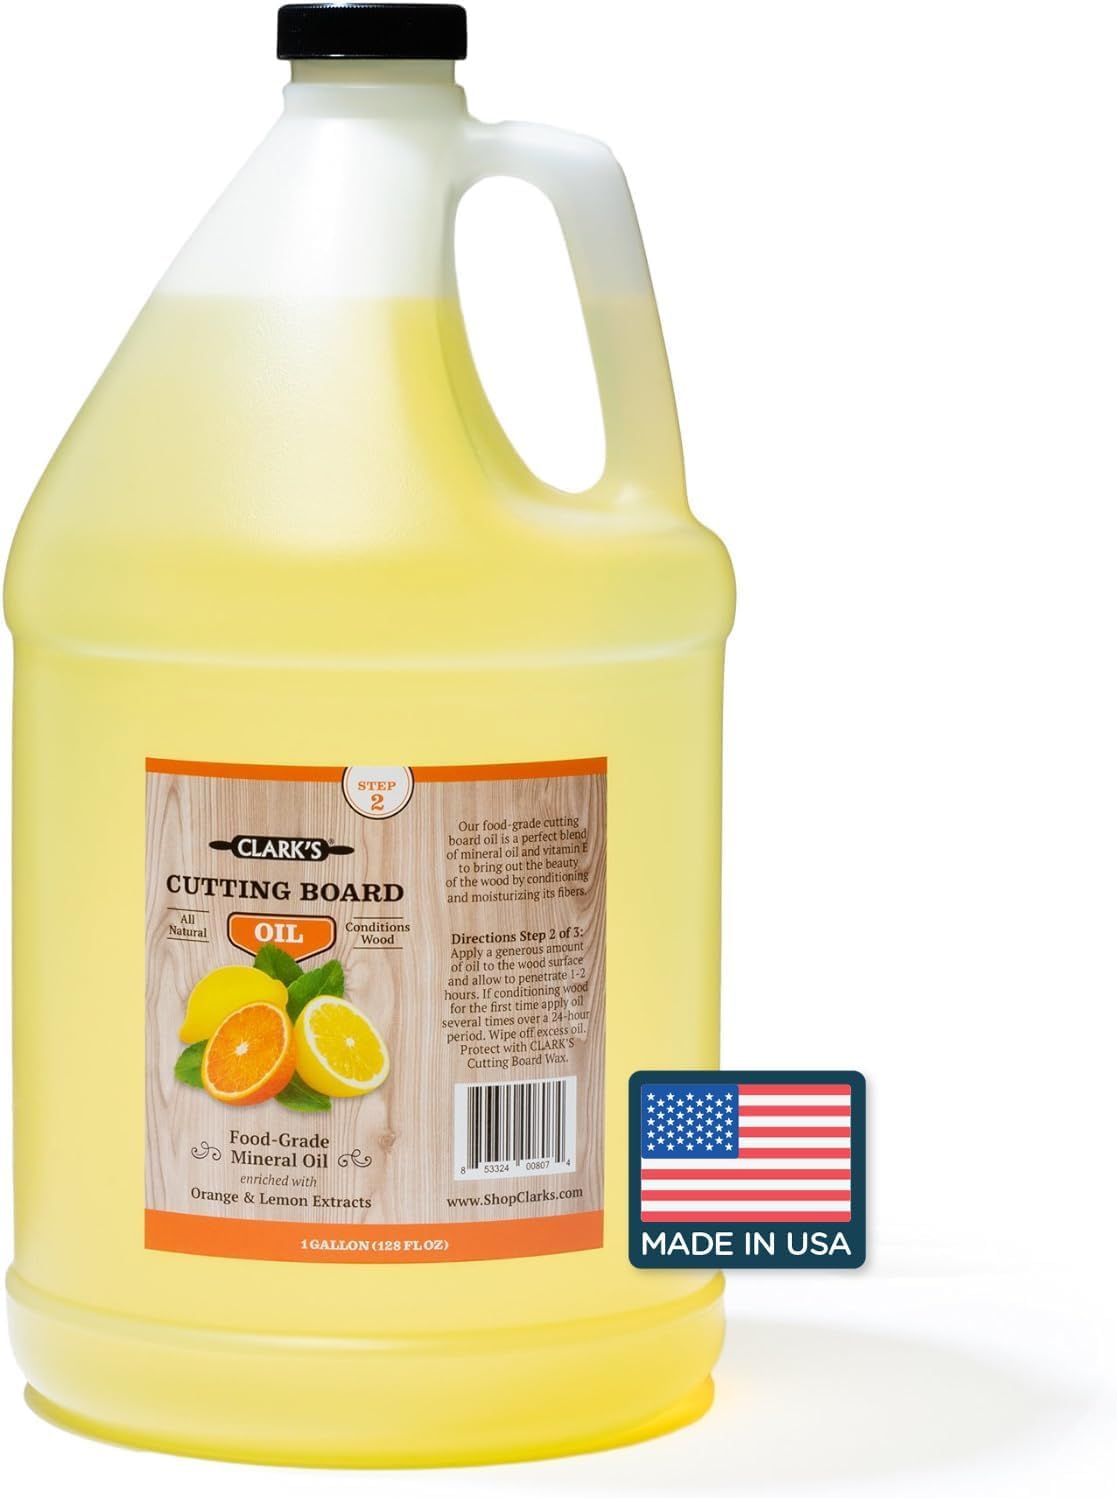 CLARK'S Cutting Board Mineral Oil - Food-Grade Mineral Oil Enriched With Orange & Lemon Extracts - Penetrates Deep Into The Wood - Perfectly Scented With Essential Oils - Prevents Cracking Or Warping